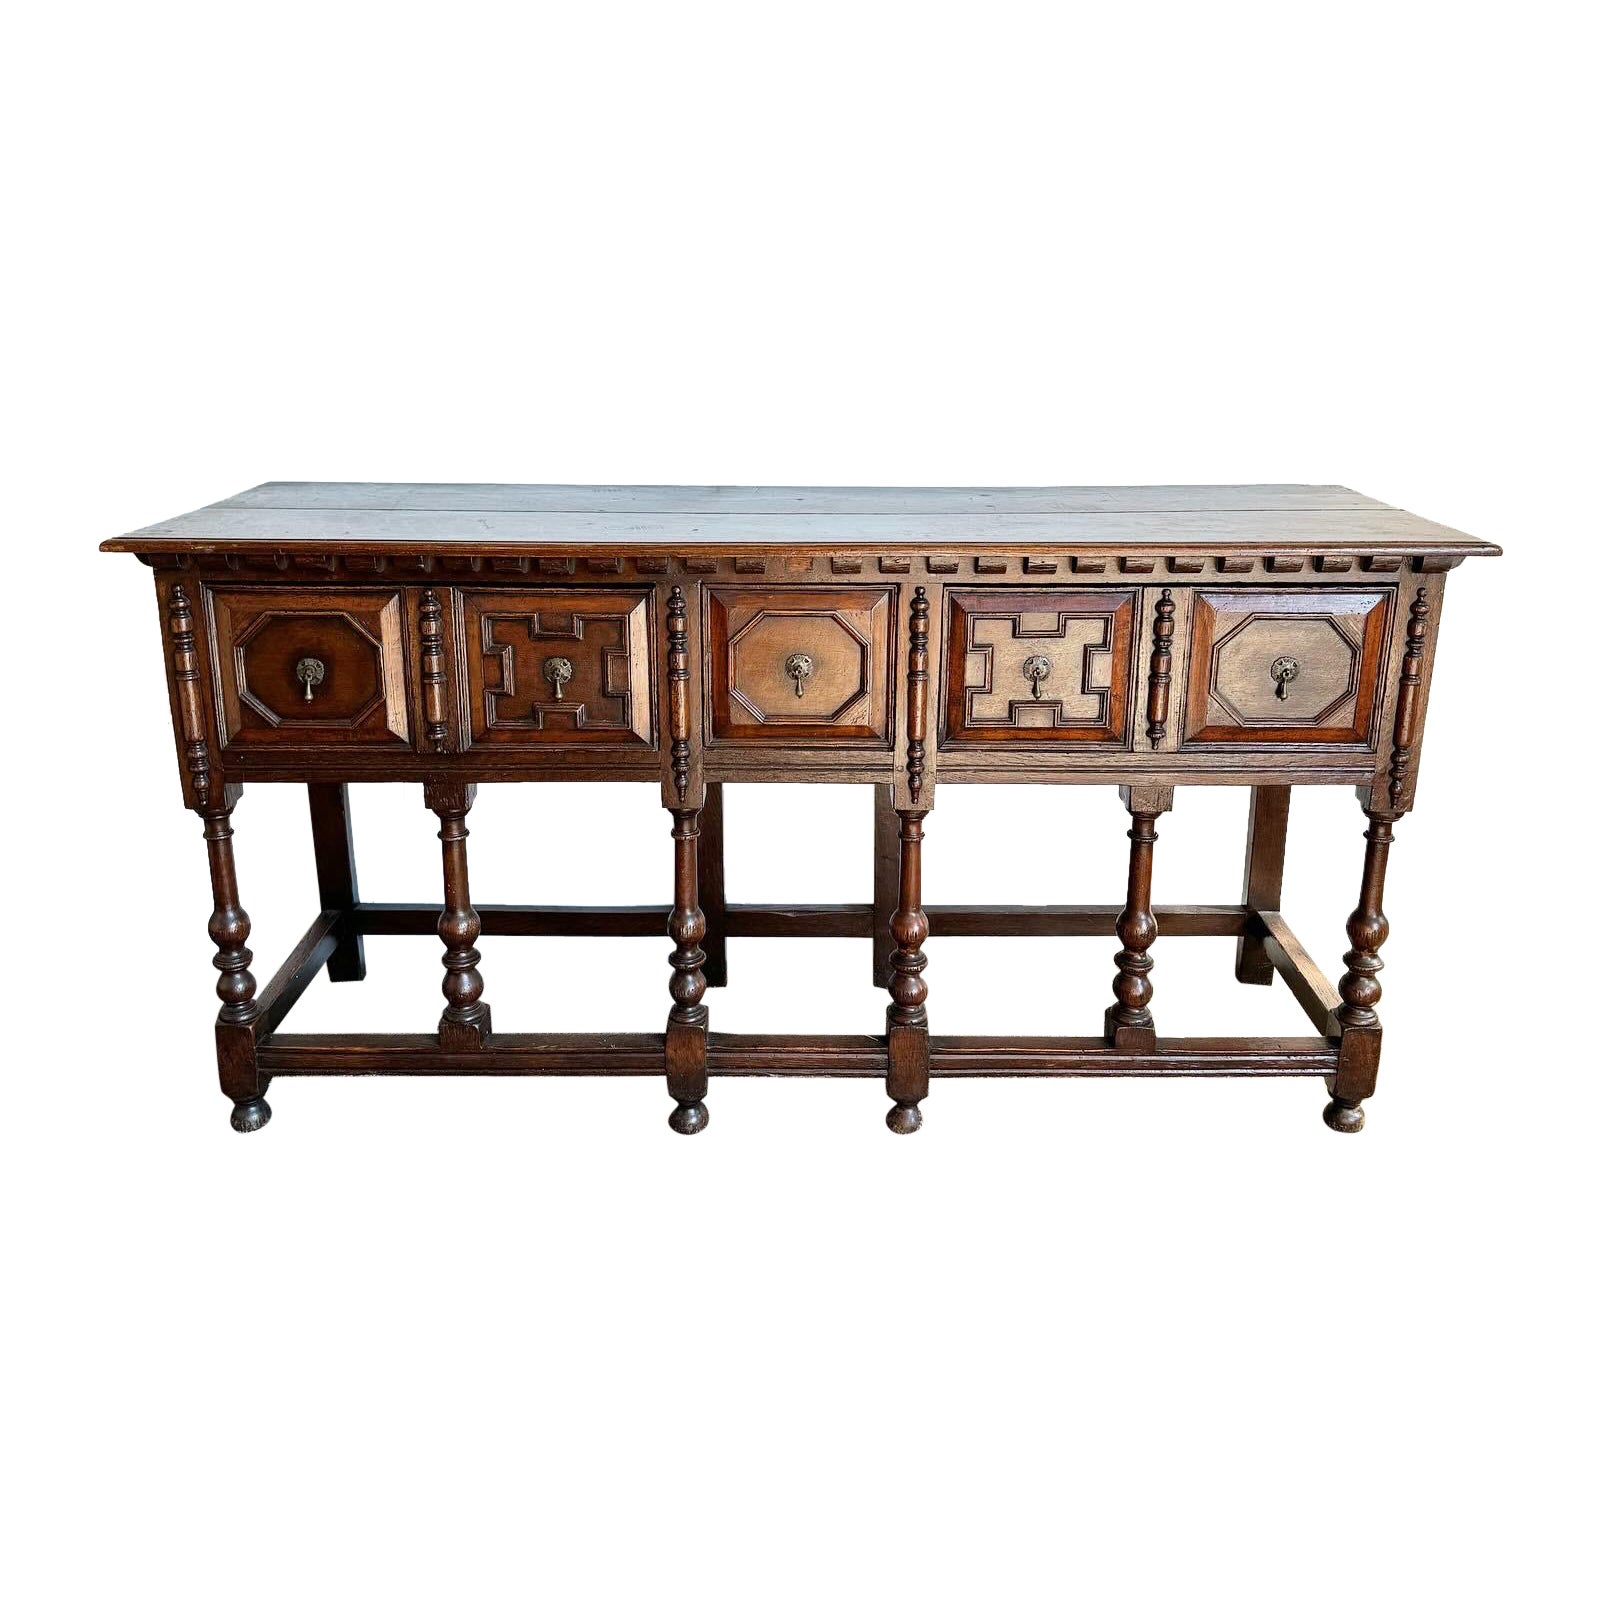 Antique English Jacobean Style Wooden Credenza/Sideboard For Sale